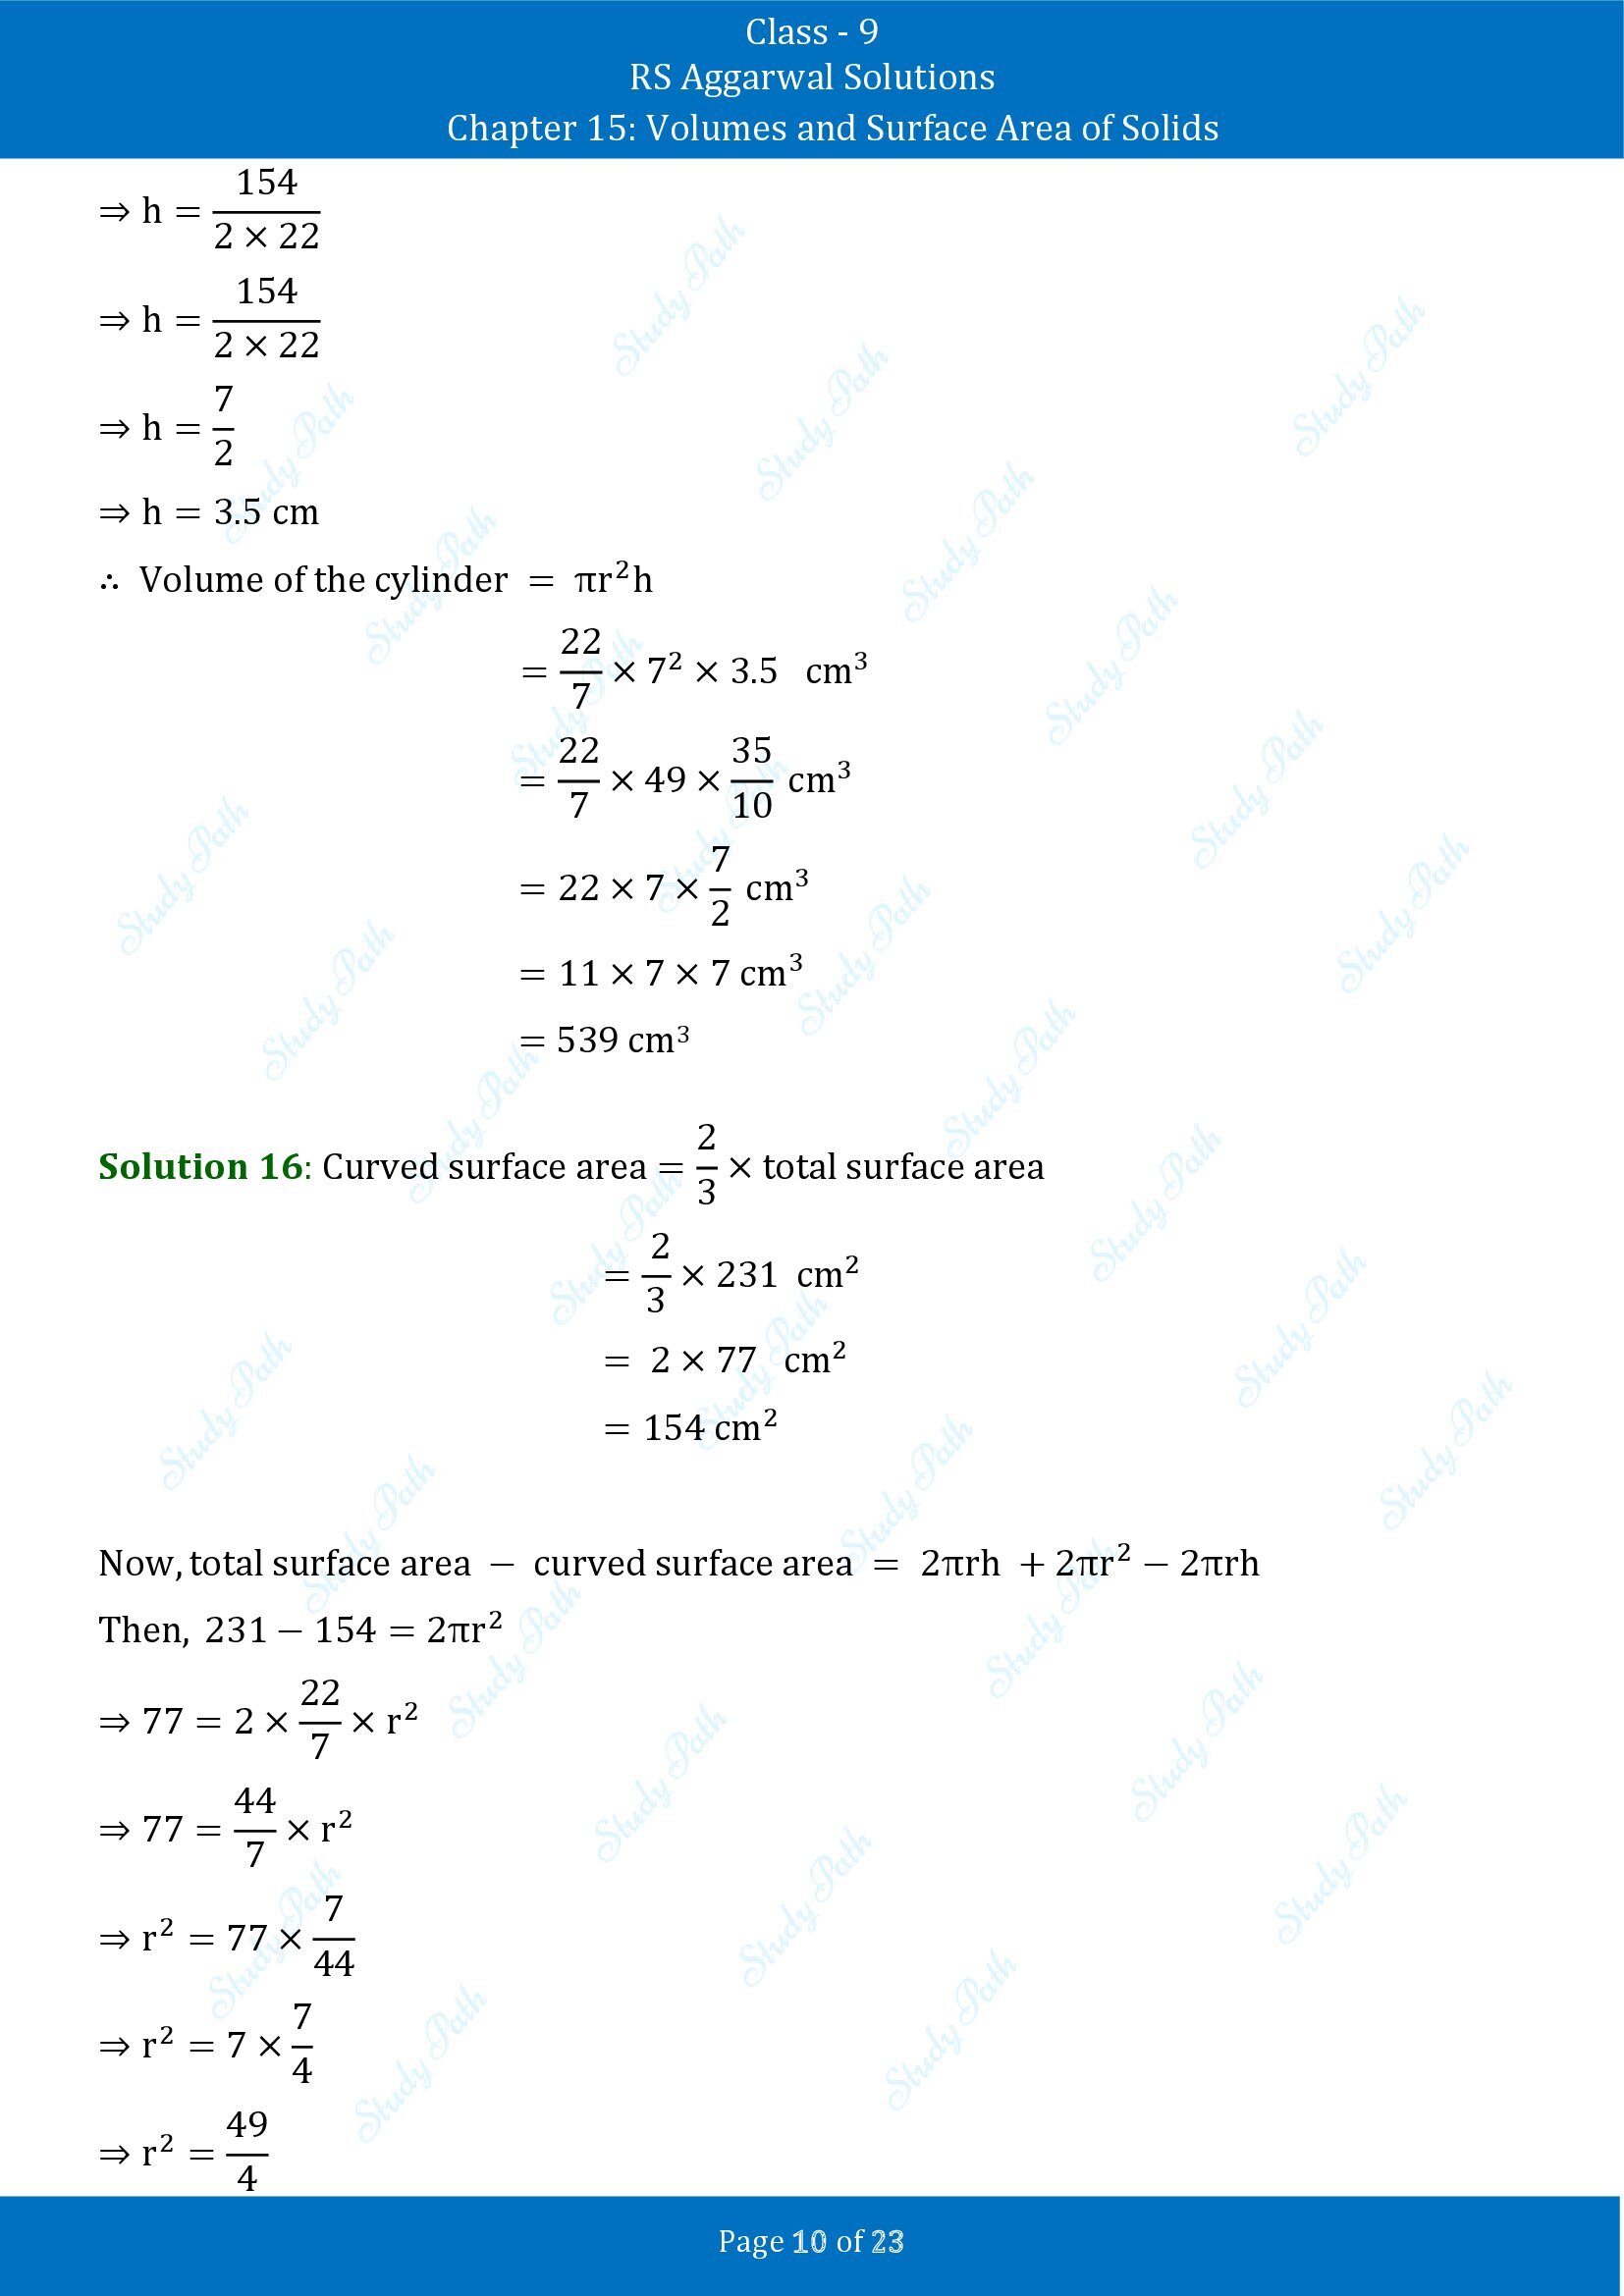 RS Aggarwal Solutions Class 9 Chapter 15 Volumes and Surface Area of Solids Exercise 15B 00010